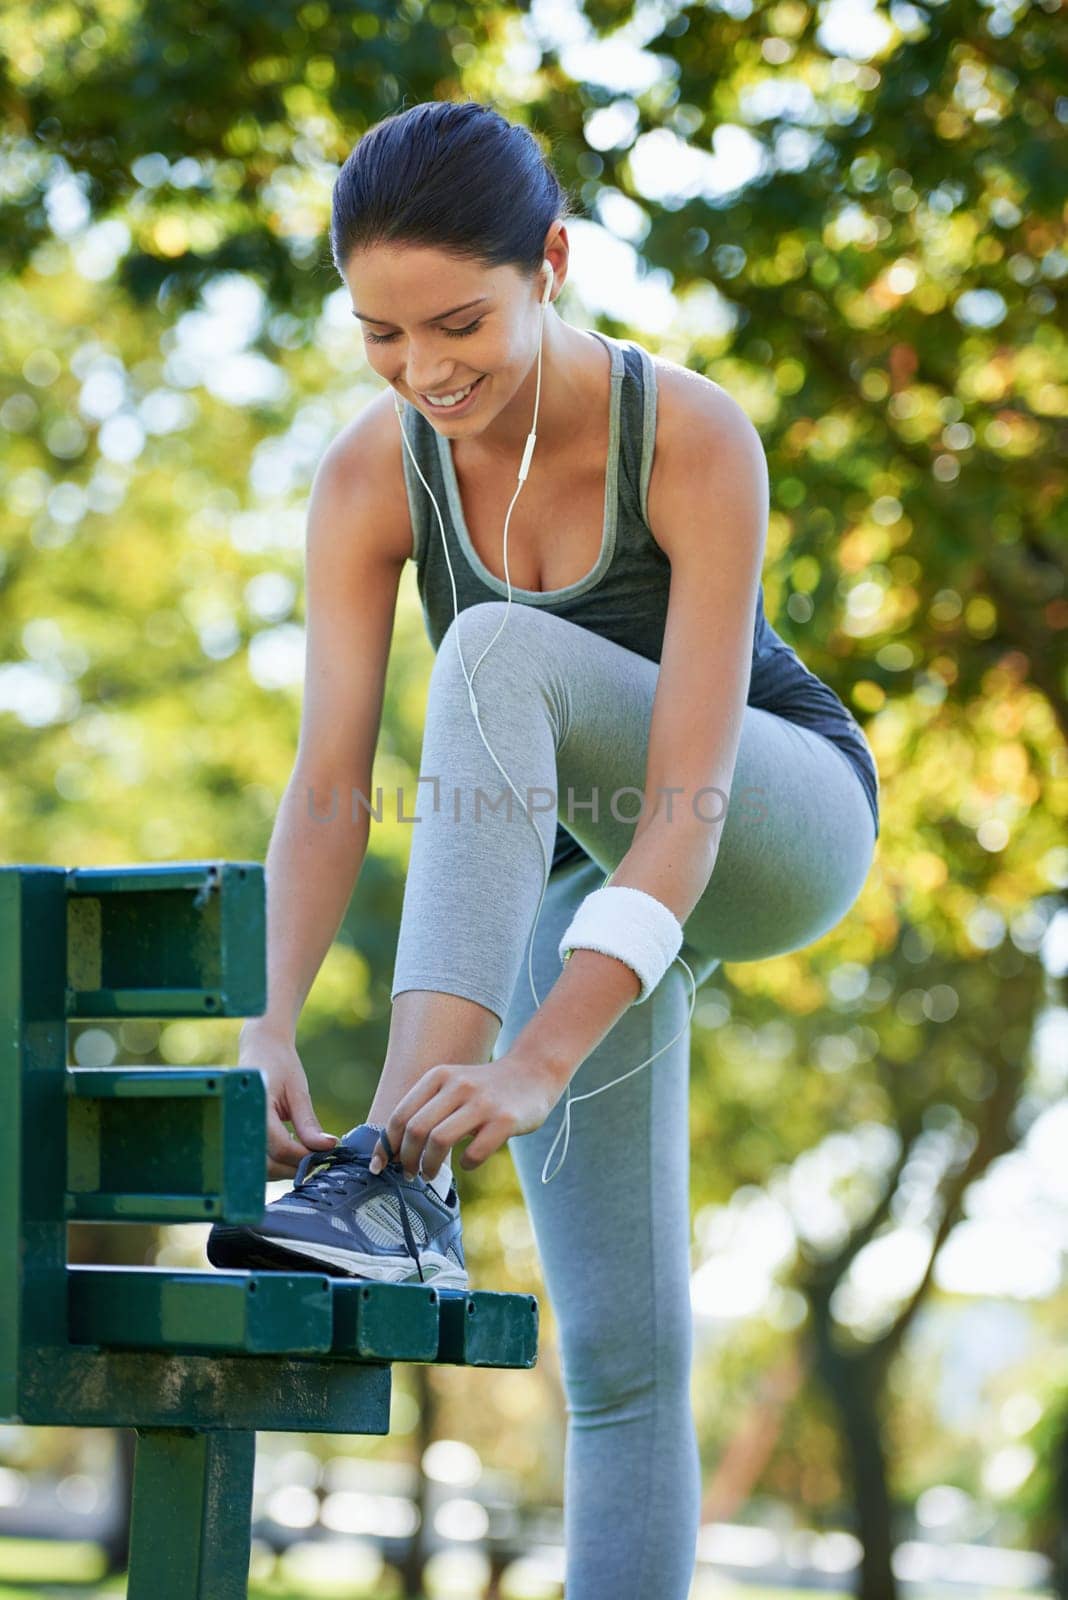 Happy woman, running or tying shoelaces in park, music or streaming audio for exercise in nature. Lady, smile or wellness with earphones for jog, fitness or training performance in outdoor in summer.